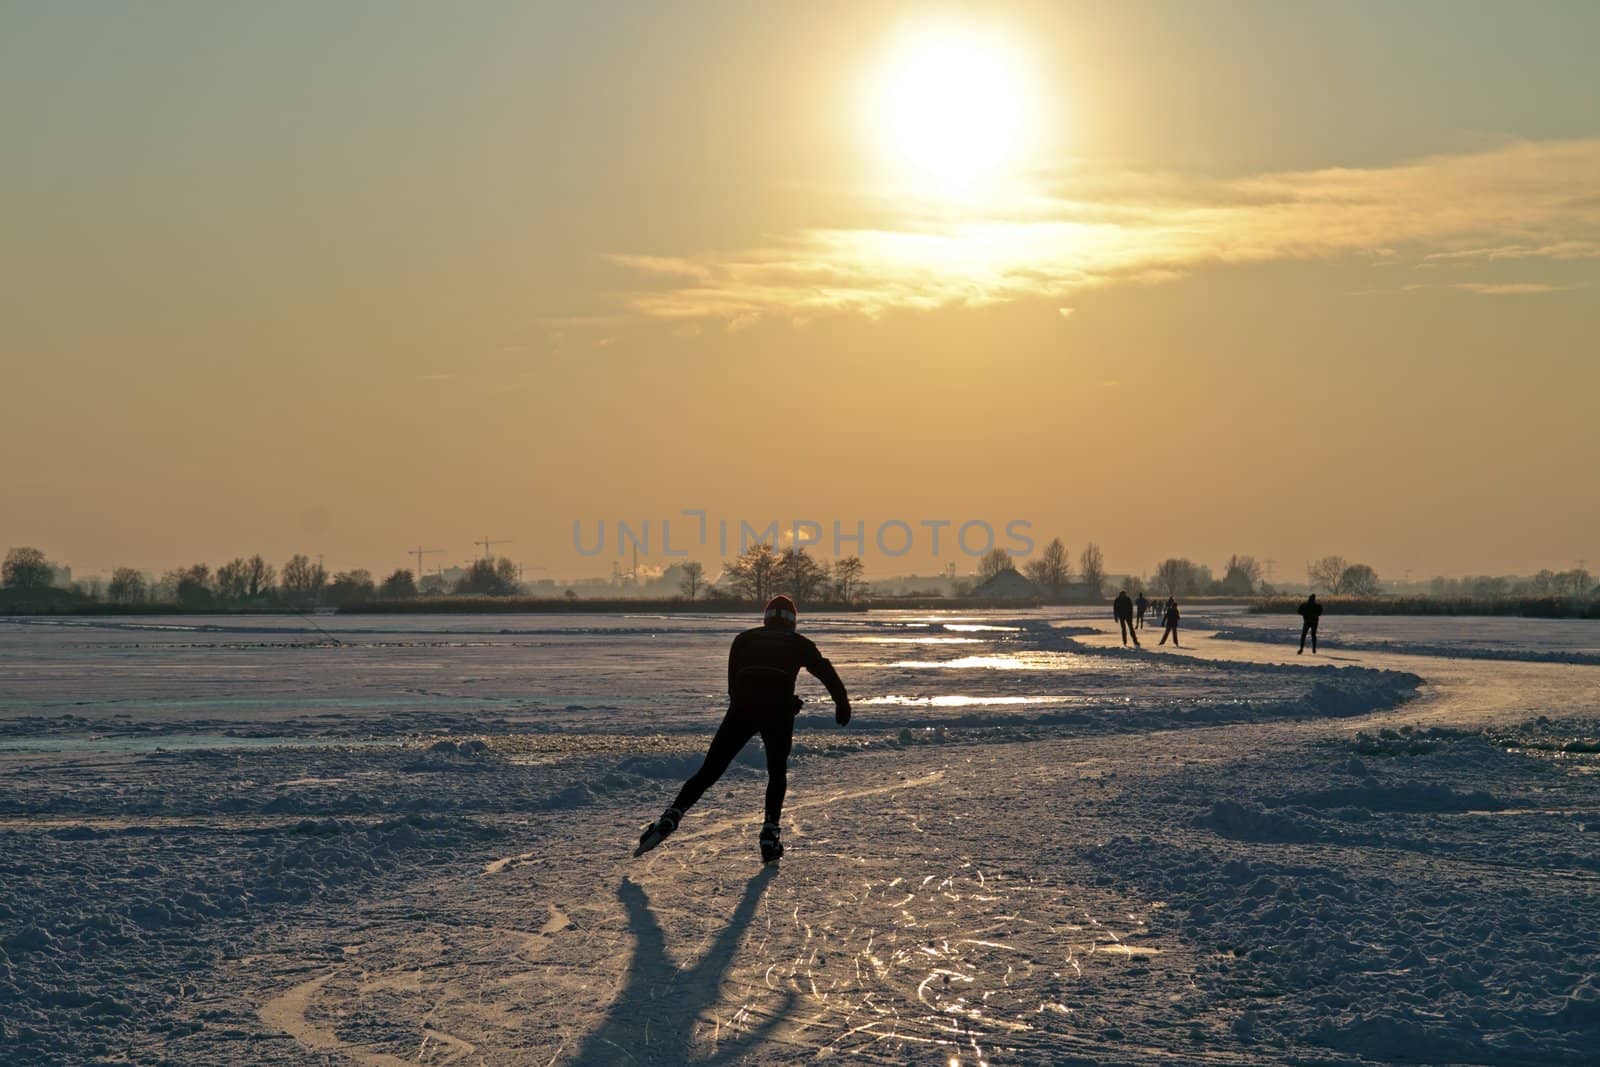 Ice skating in the countryside from the Netherlands at sunset by devy